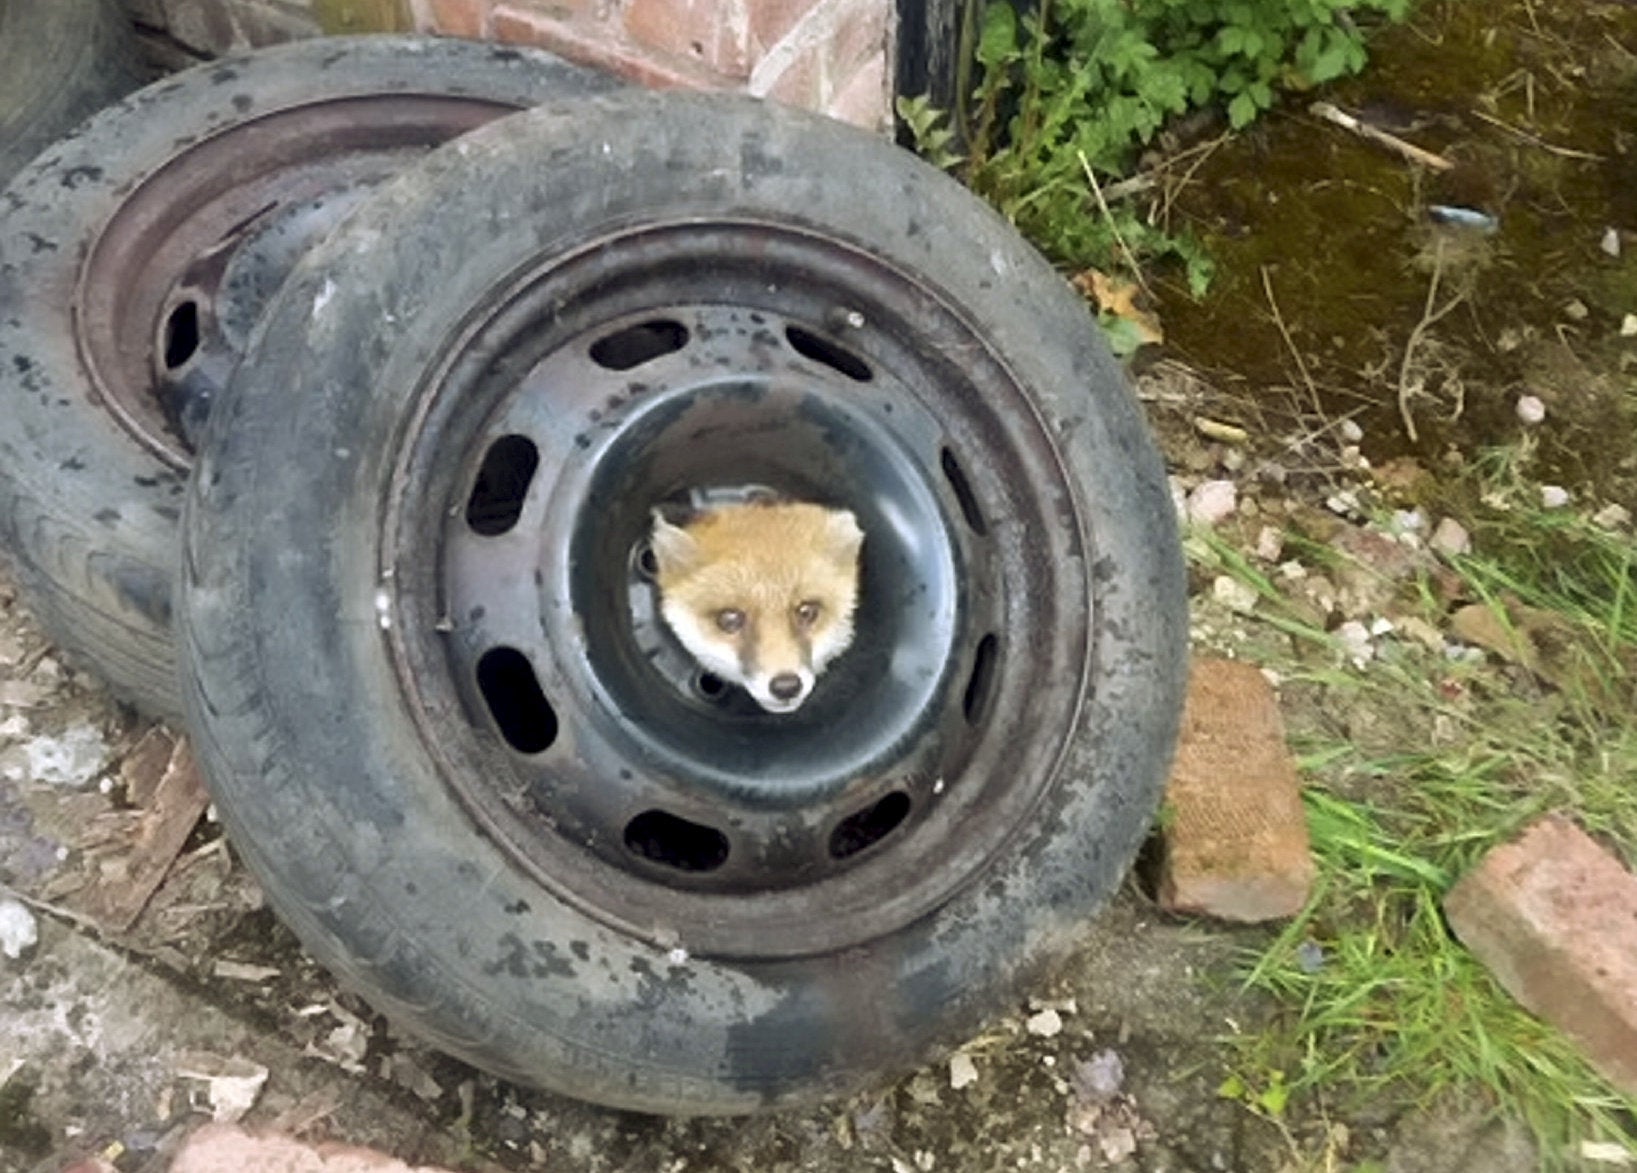 Foxes are known to stick their heads through the holes in the middle of wheels when they are looking for food